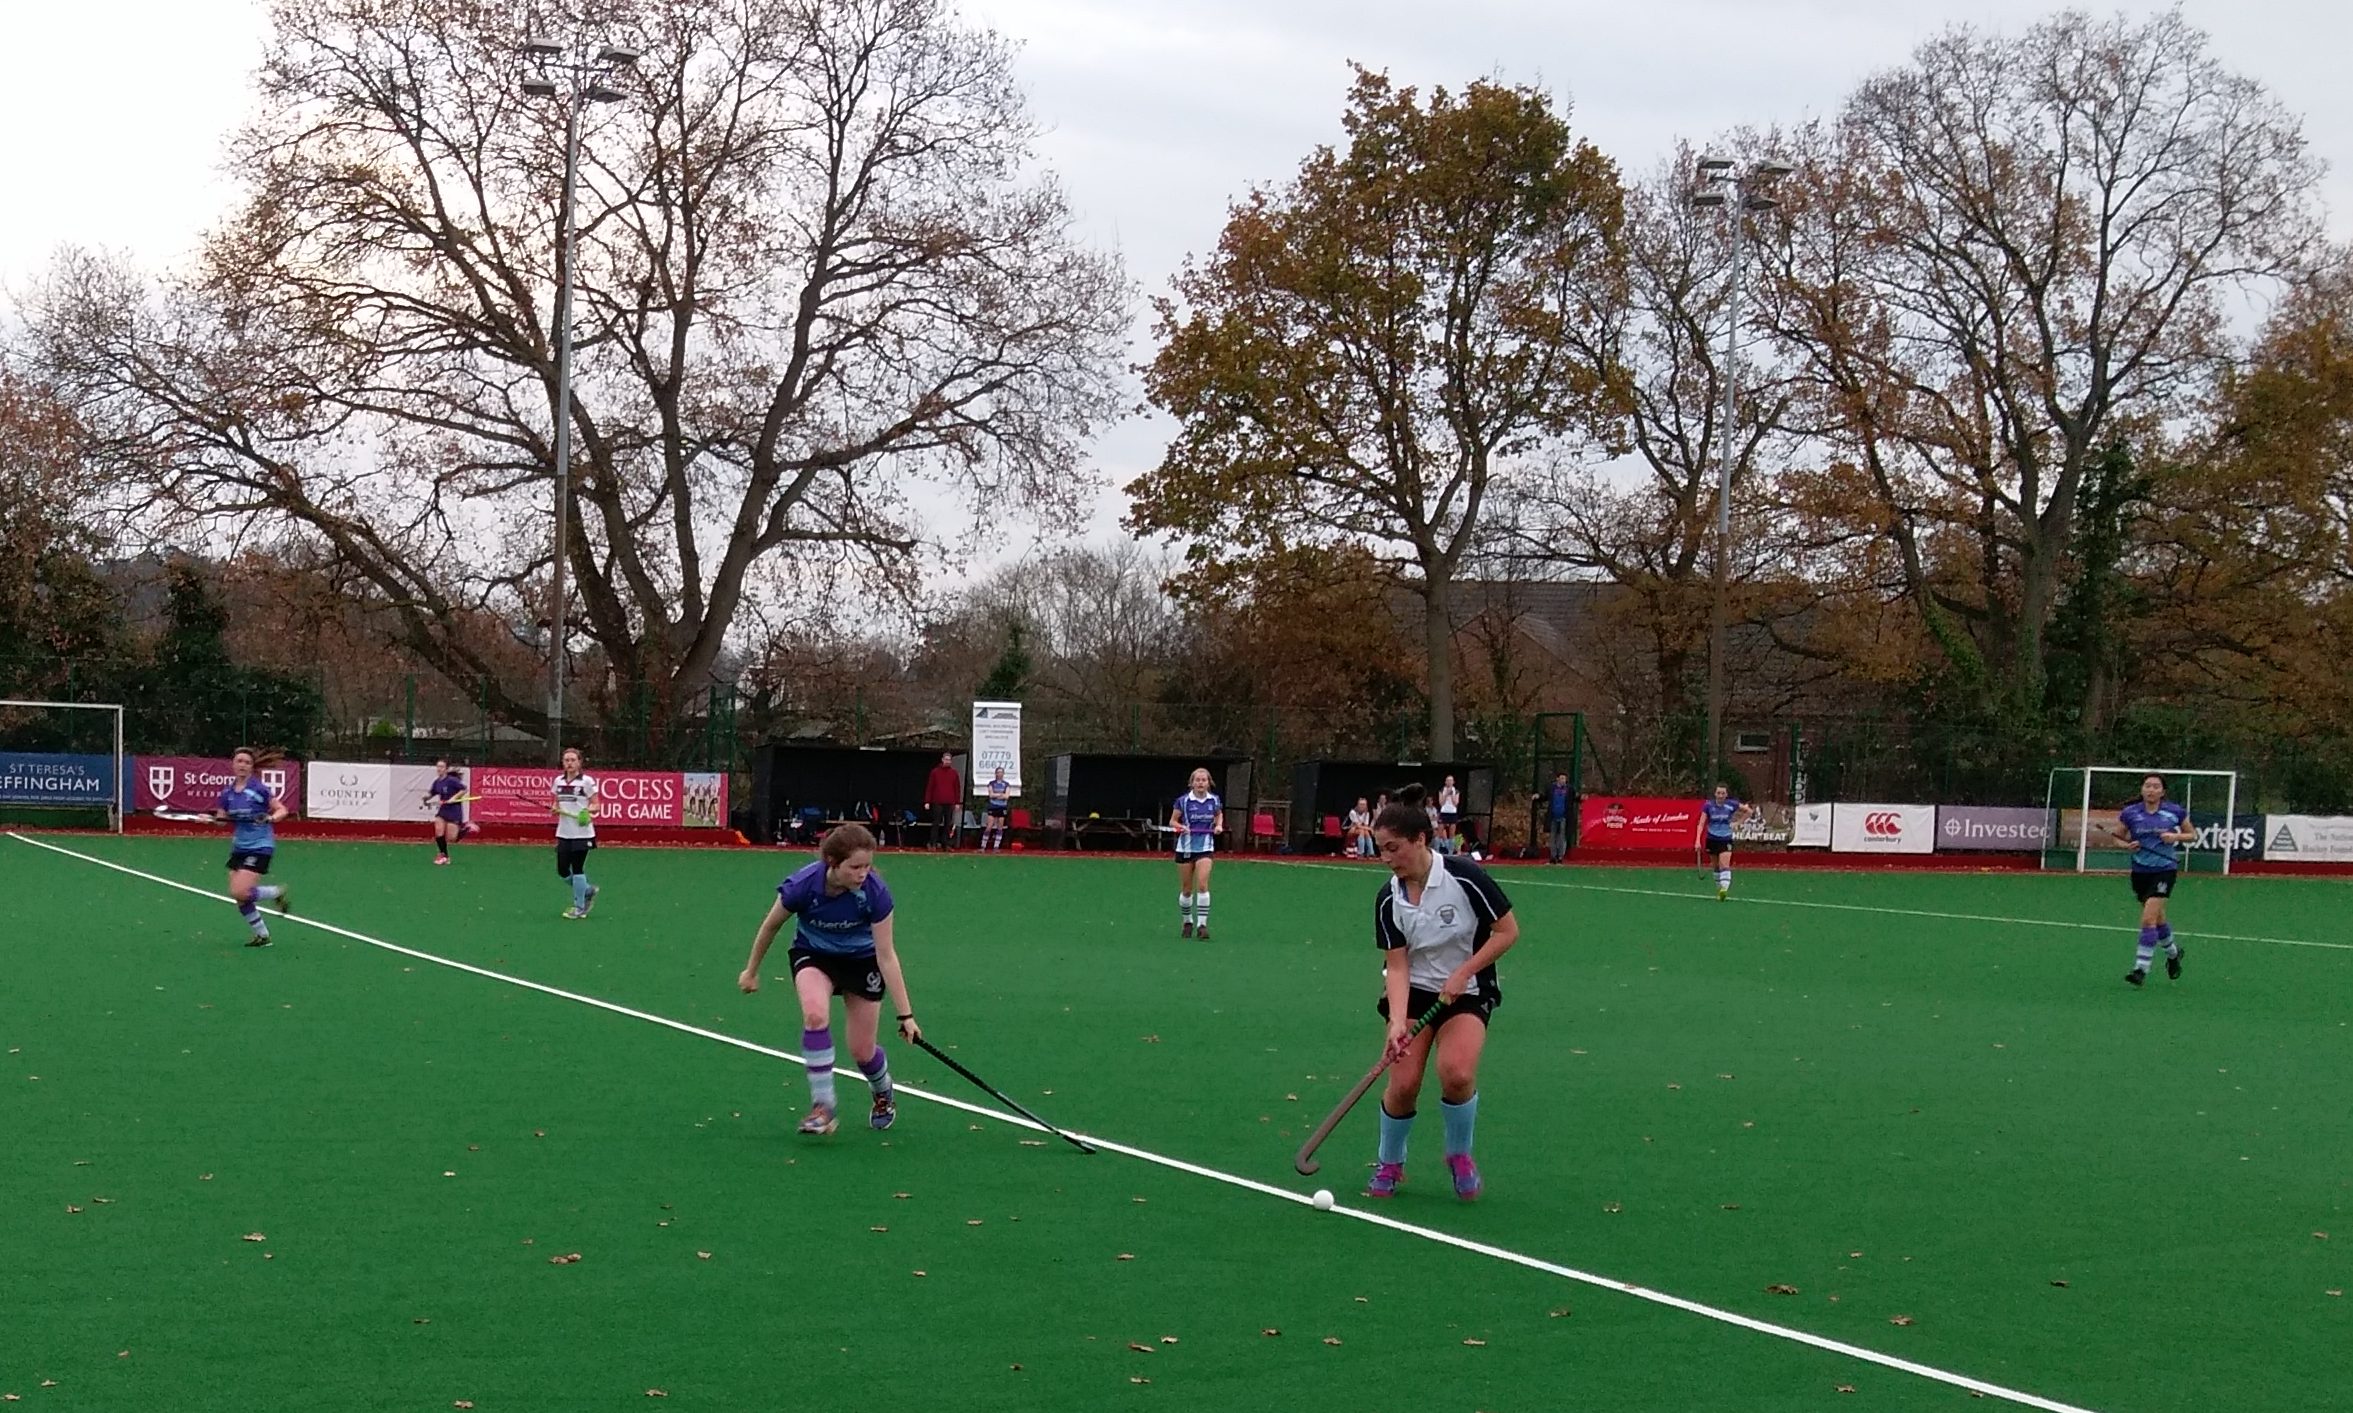 KU hockey ladies top of the tree for Christmas after UCL draw